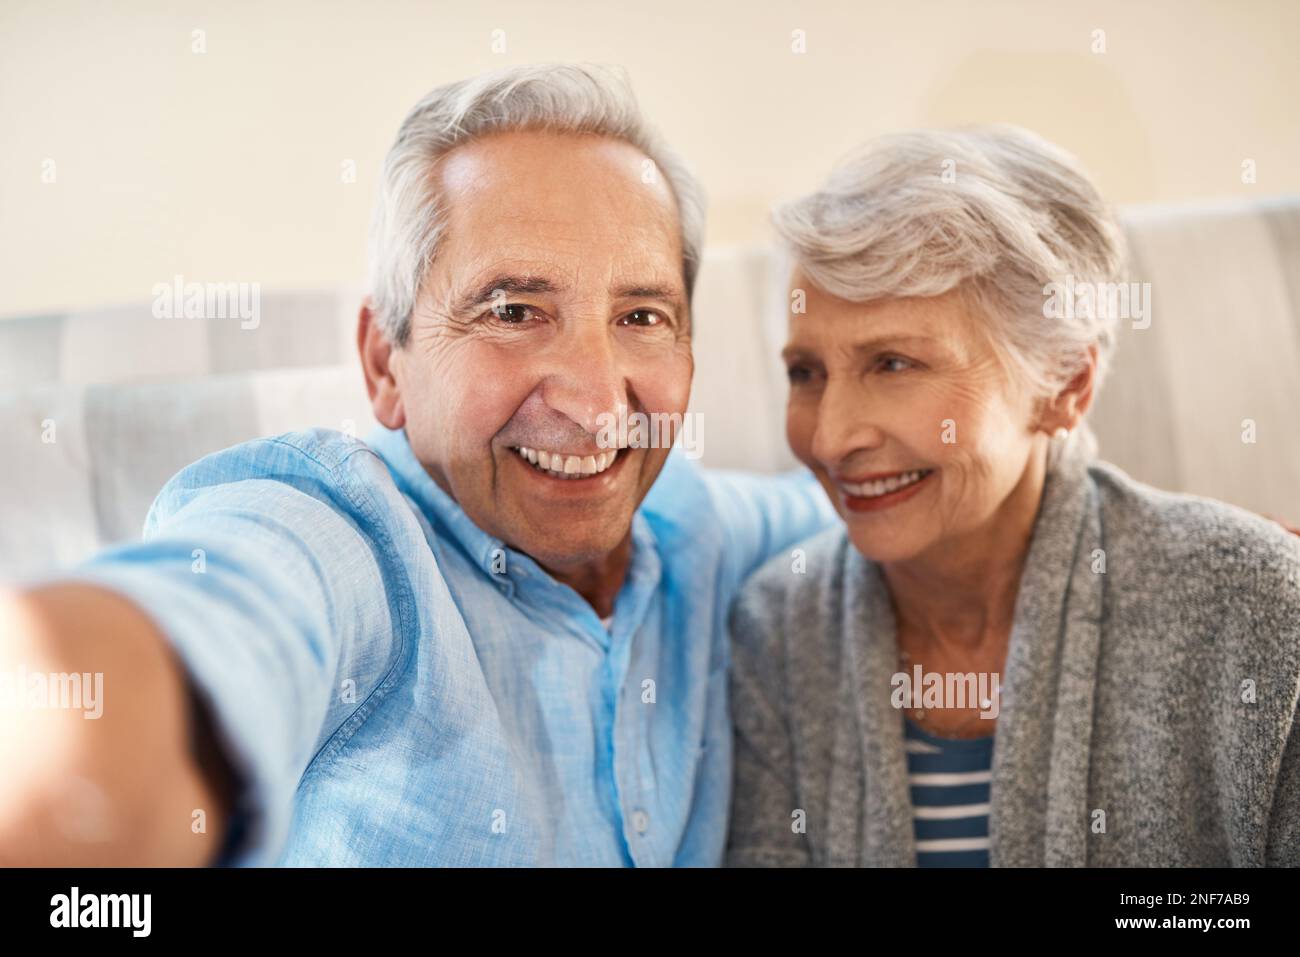 Getting our retirement off to a relaxing start. a senior couple taking selfie together on the sofa at home. Stock Photo